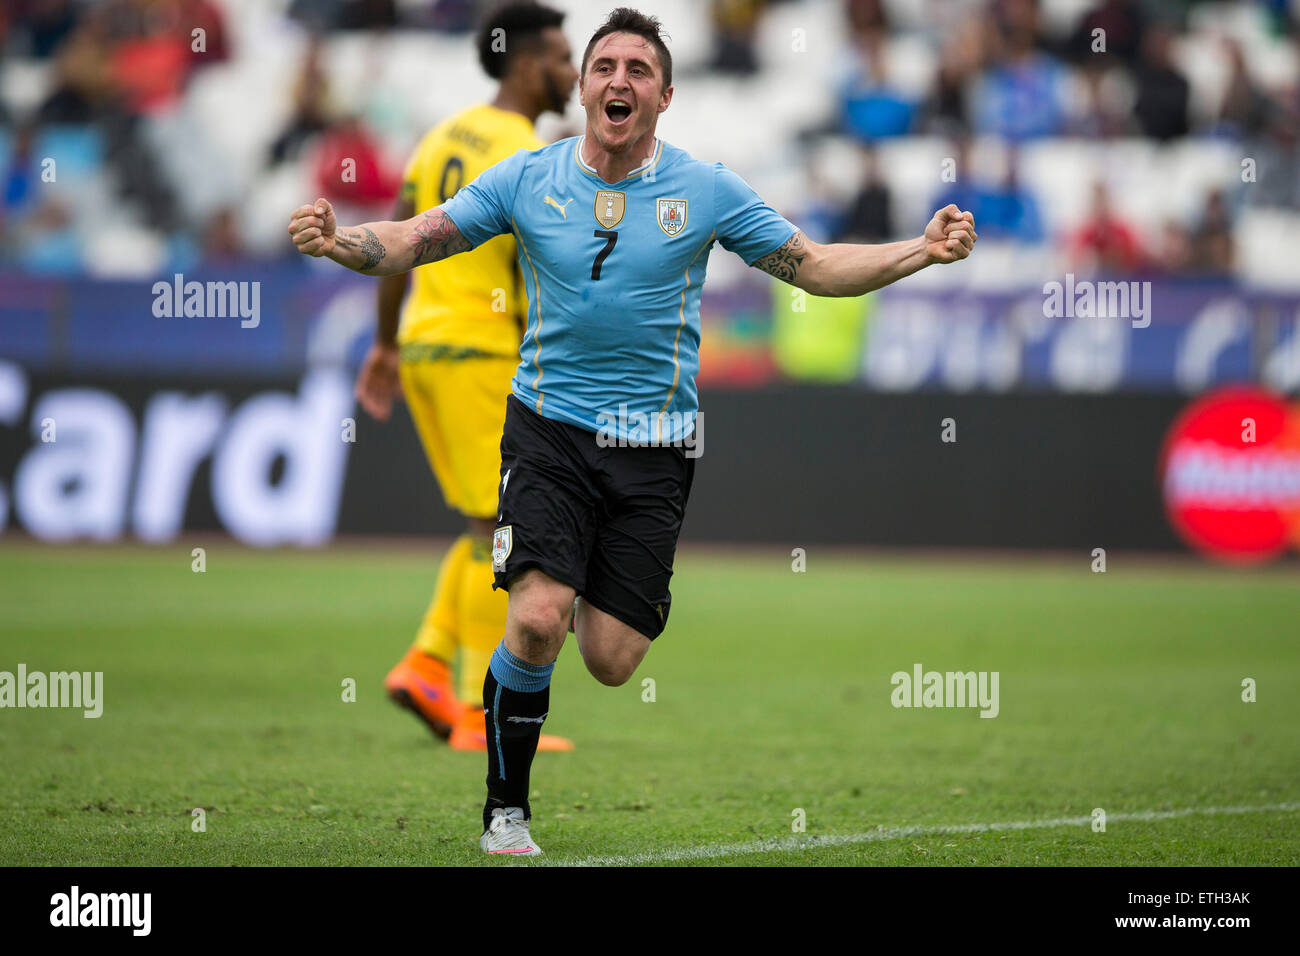 Antofagasta, Chile. 13th June, 2015. Cristian Rodriguez of Uruguay celebrates after scoring during a Group B match against Jamaica at Copa America 2015, in Antofagasta, Chile, on June 13, 2015. Uruguay won 1-0. © Luis Echeverria/Xinhua/Alamy Live News Stock Photo